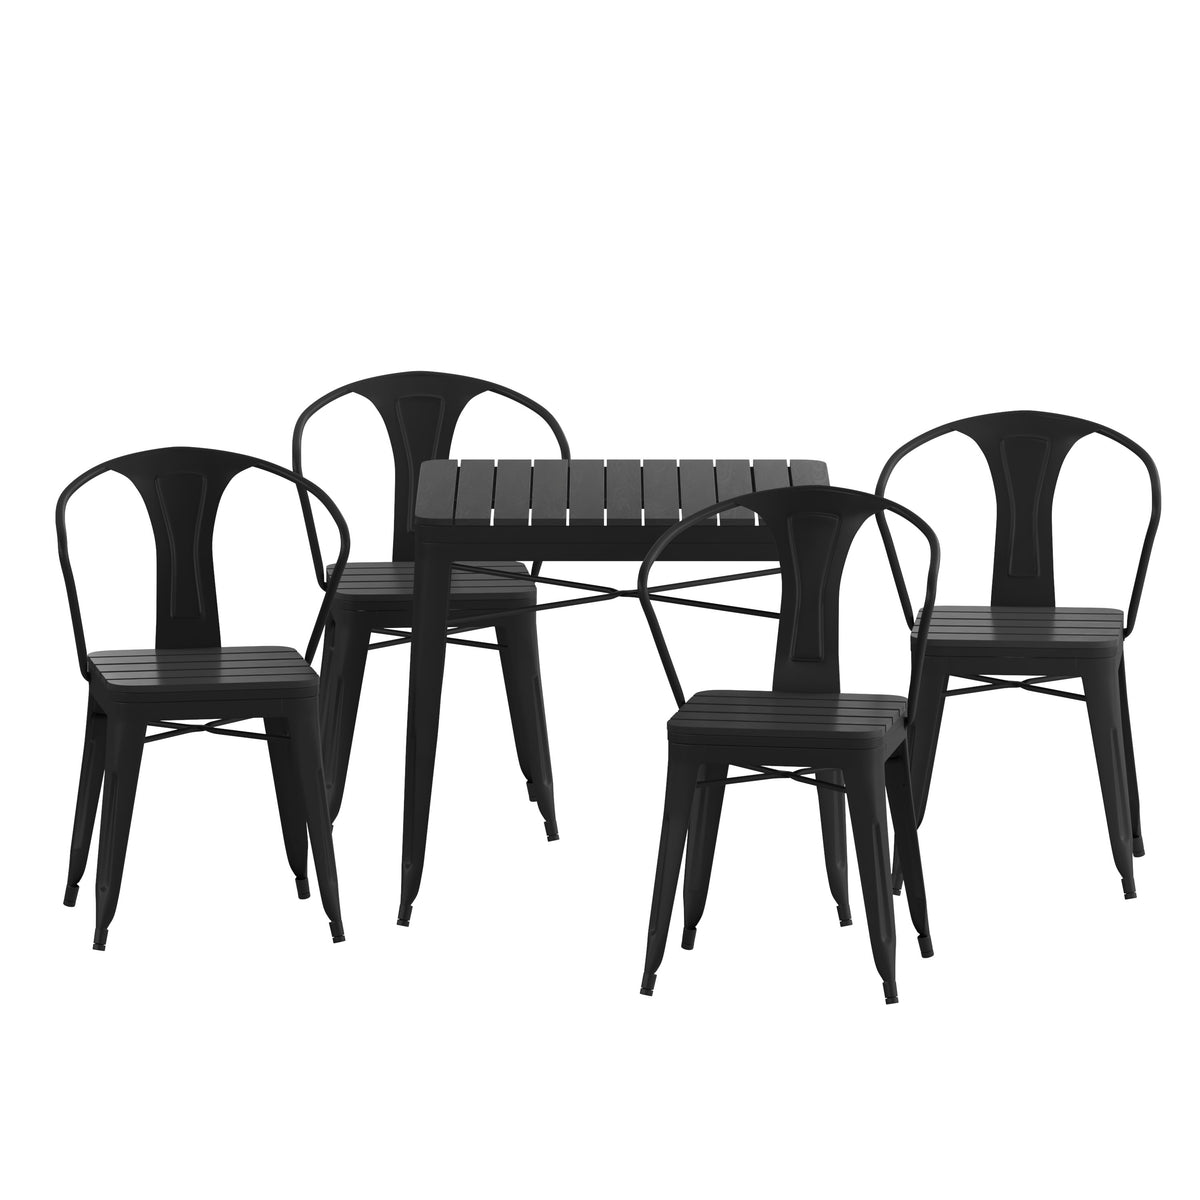 Black |#| All-Weather Resin Top Square Table & 4 Metal Chairs with Poly Resin Seats-Black